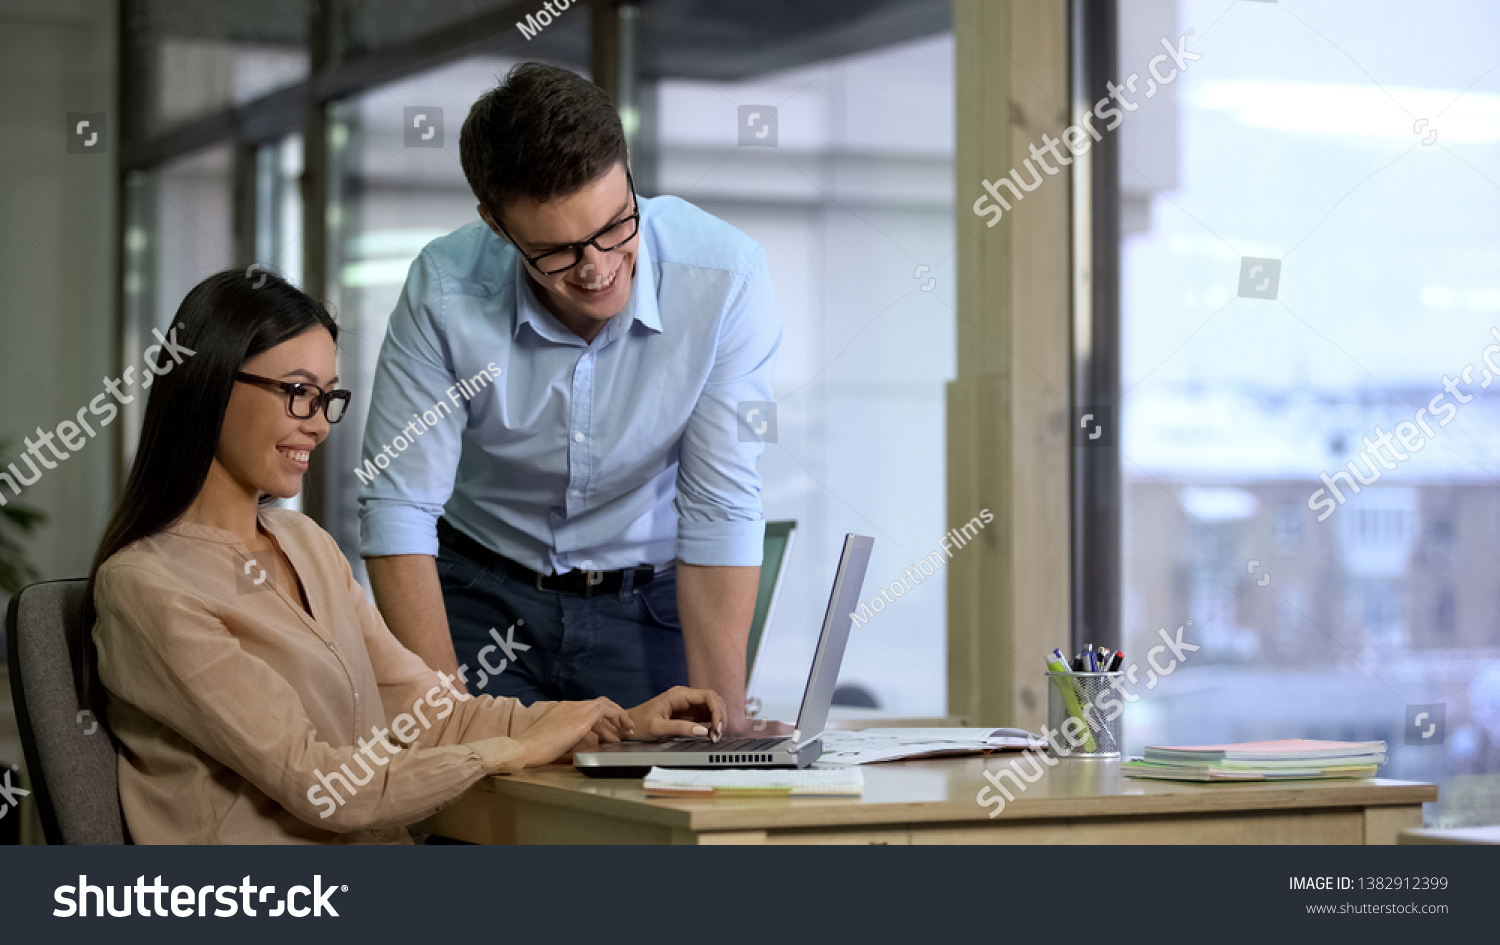 Multiracial smiling colleagues searching for information in internet, workplace #1382912399